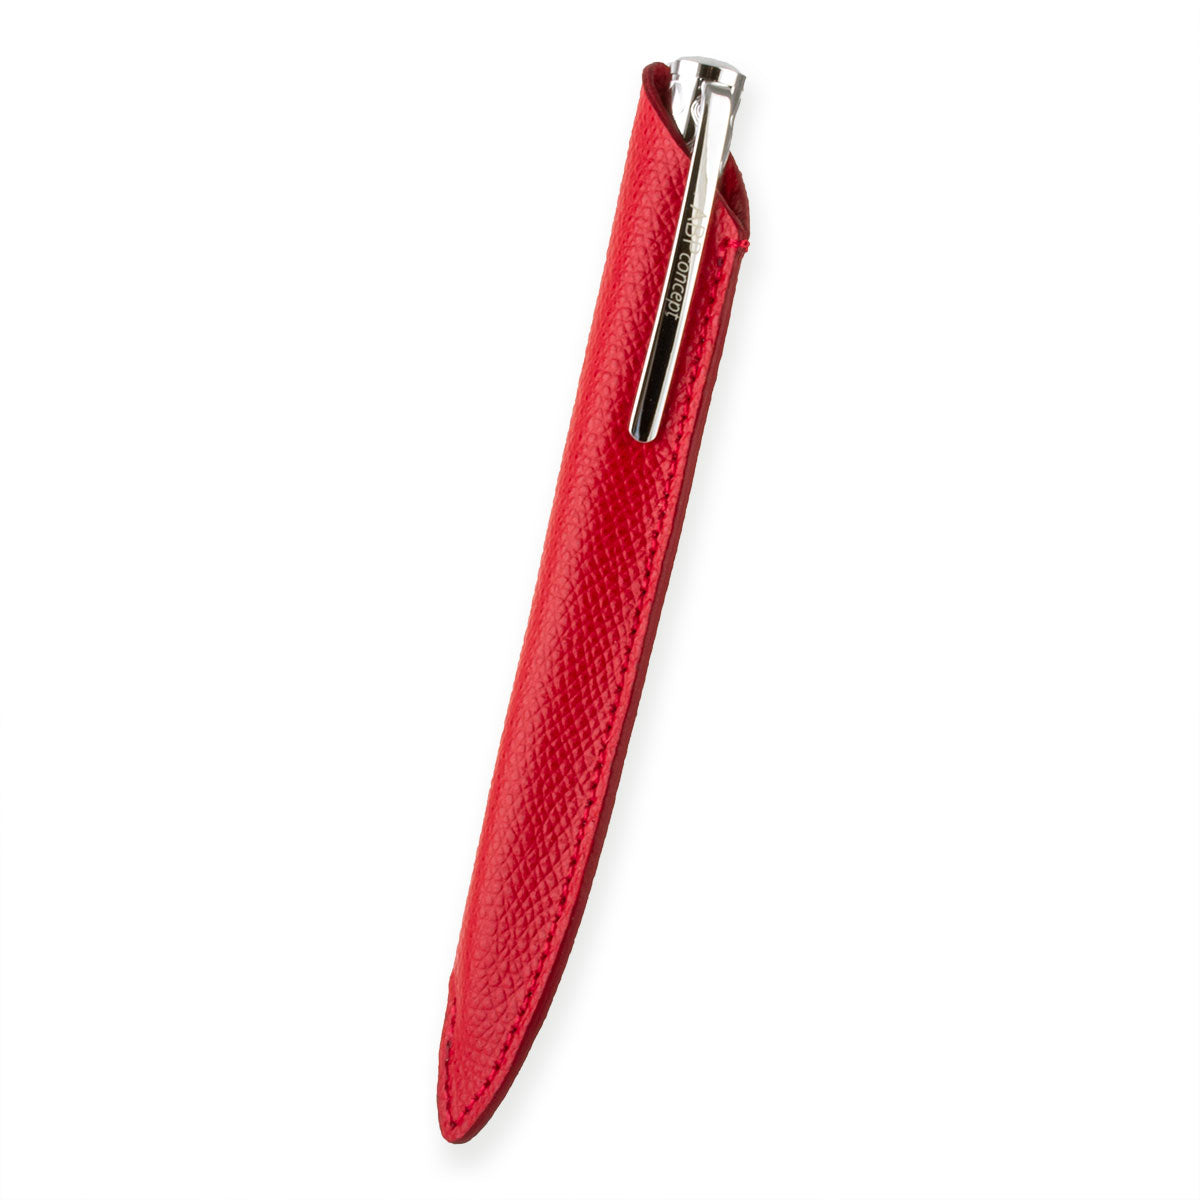 "Essential" Ballpoint pen leather case - Rhodium steel, gold colored steel or black PVD finish - Grained calf